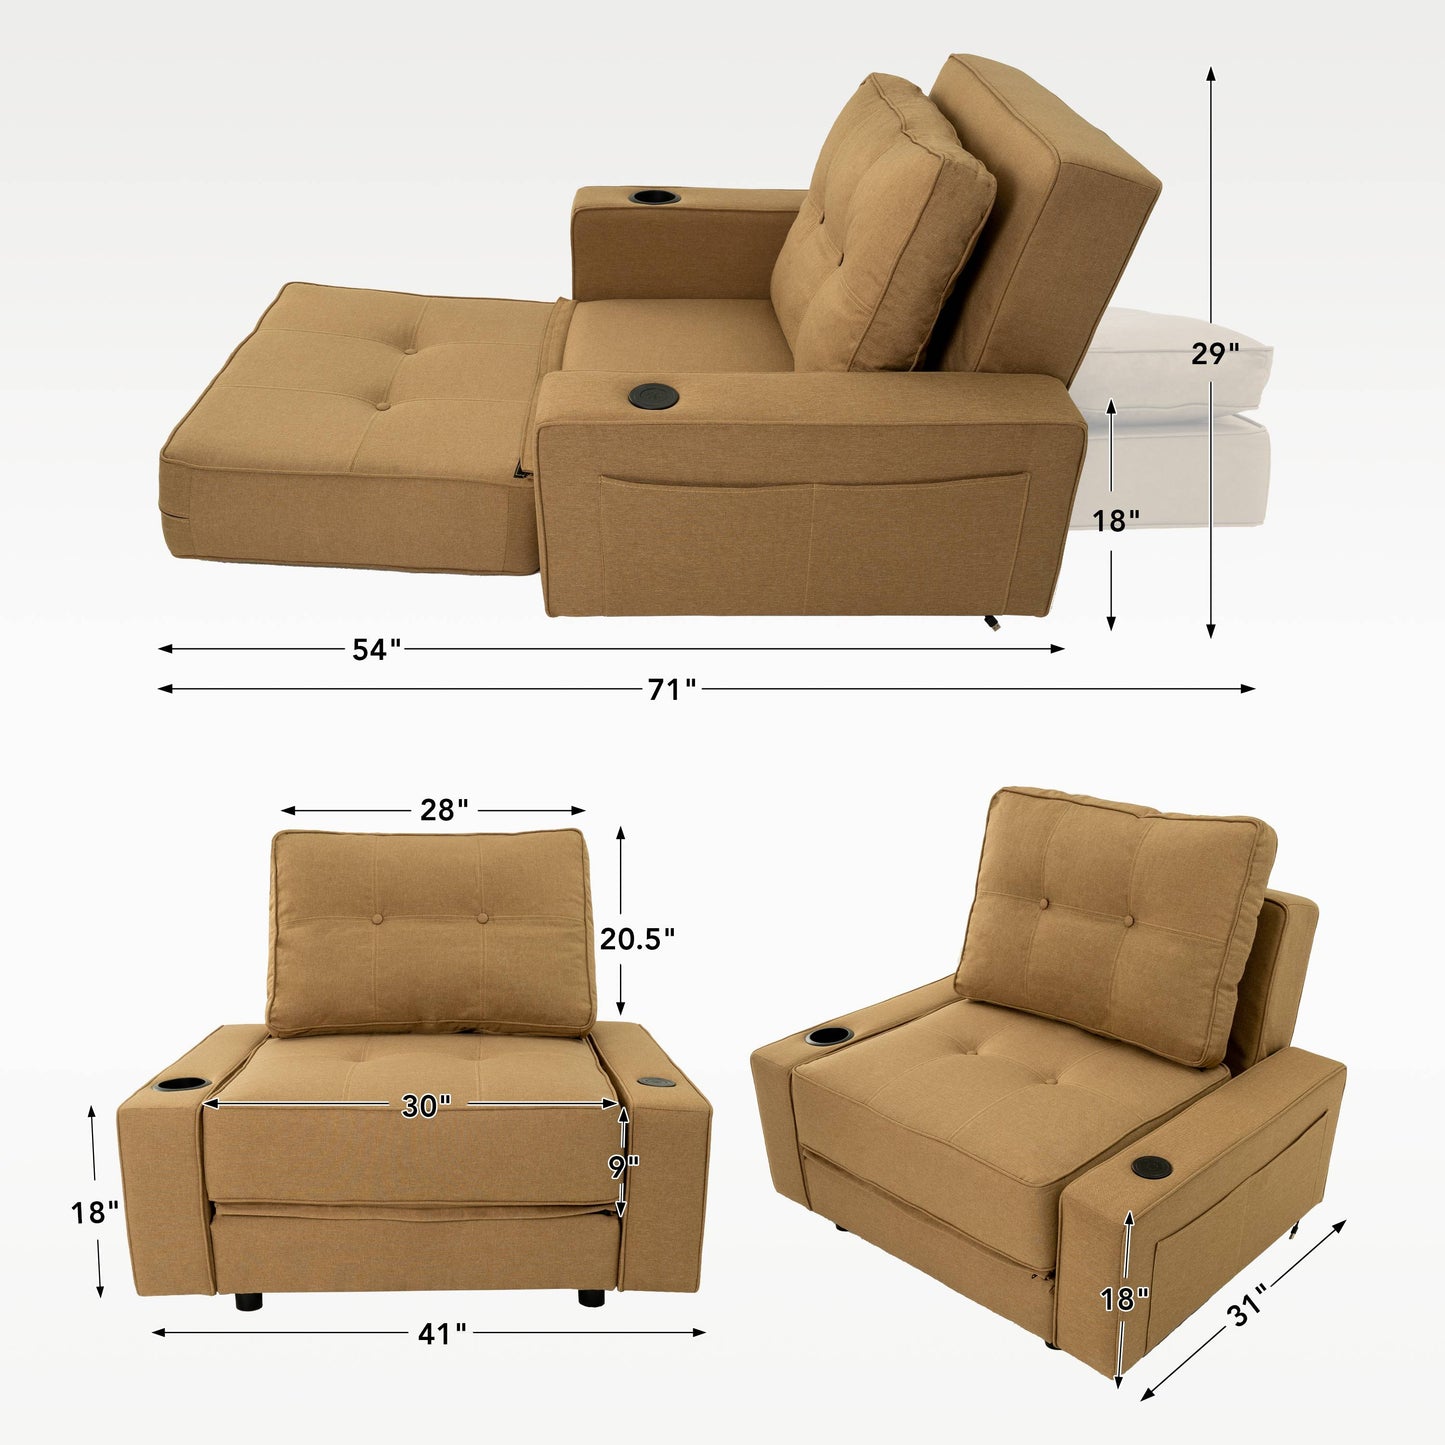 Adjustable backrest folding technical fabric three-in-one sofa bed chair